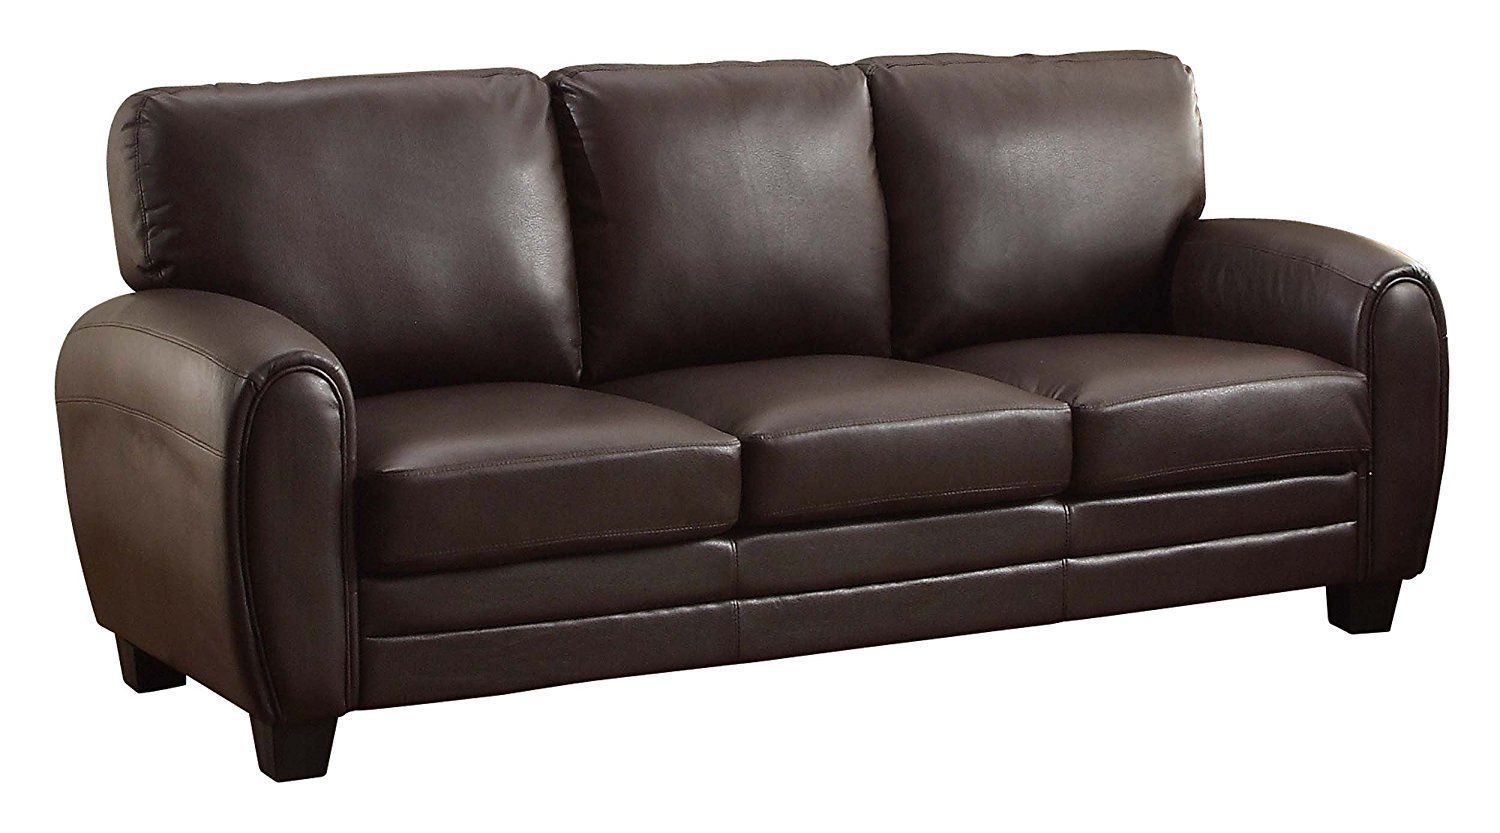 Brown Faux Leather Couch – Home Furniture Design In Faux Leather Sofas In Dark Brown (Gallery 3 of 20)